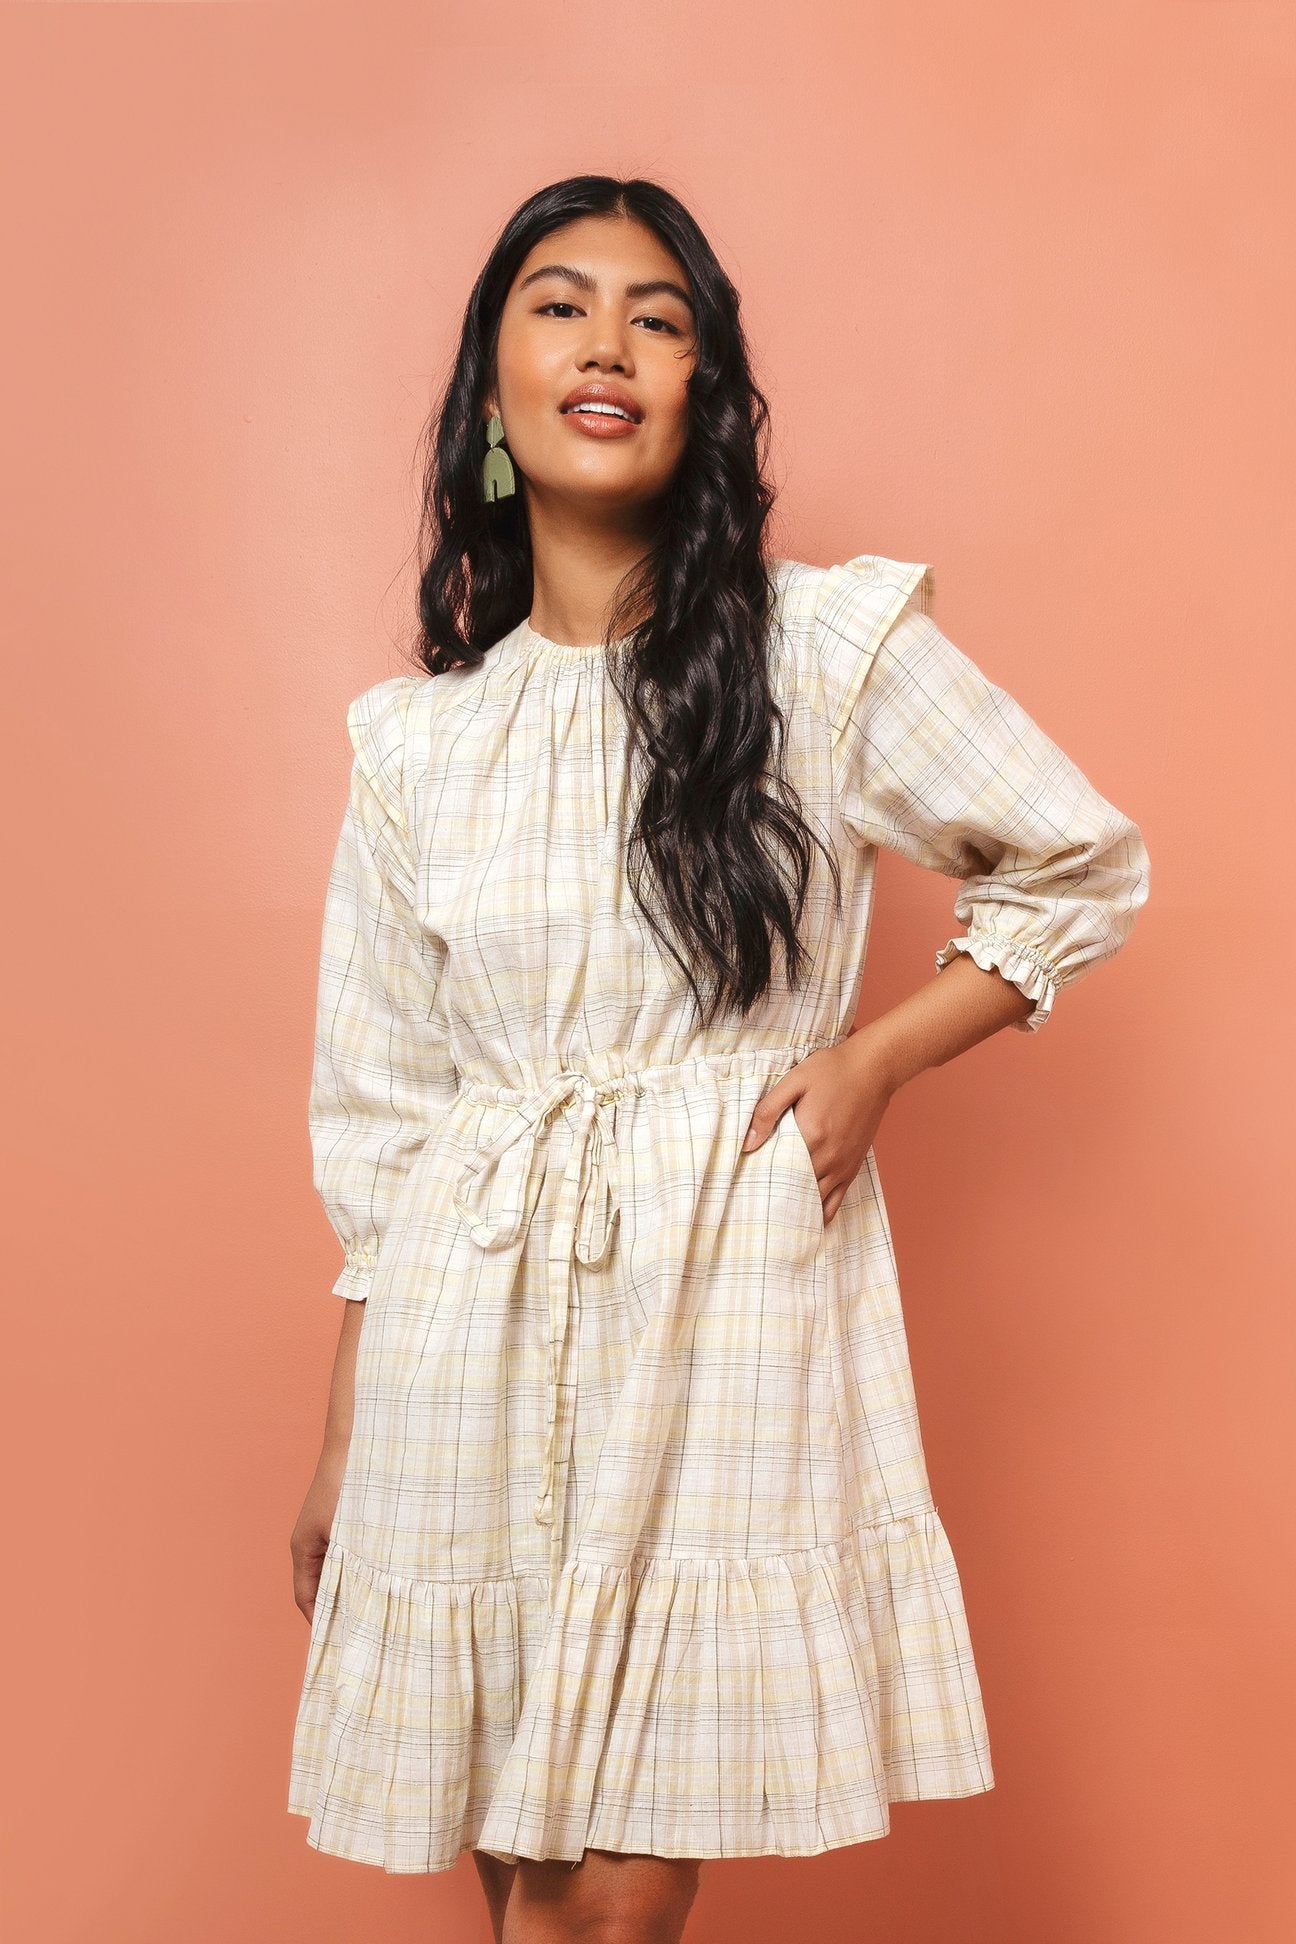 Woman wearing the Davenport Dress sewing pattern by Friday Pattern Company. A dress pattern made in cotton lawn or linen fabrics, featuring roomy pockets, full sleeves with an elastic ruffle hem, shoulder flutter detail, a drawstring waist and tiered hem.